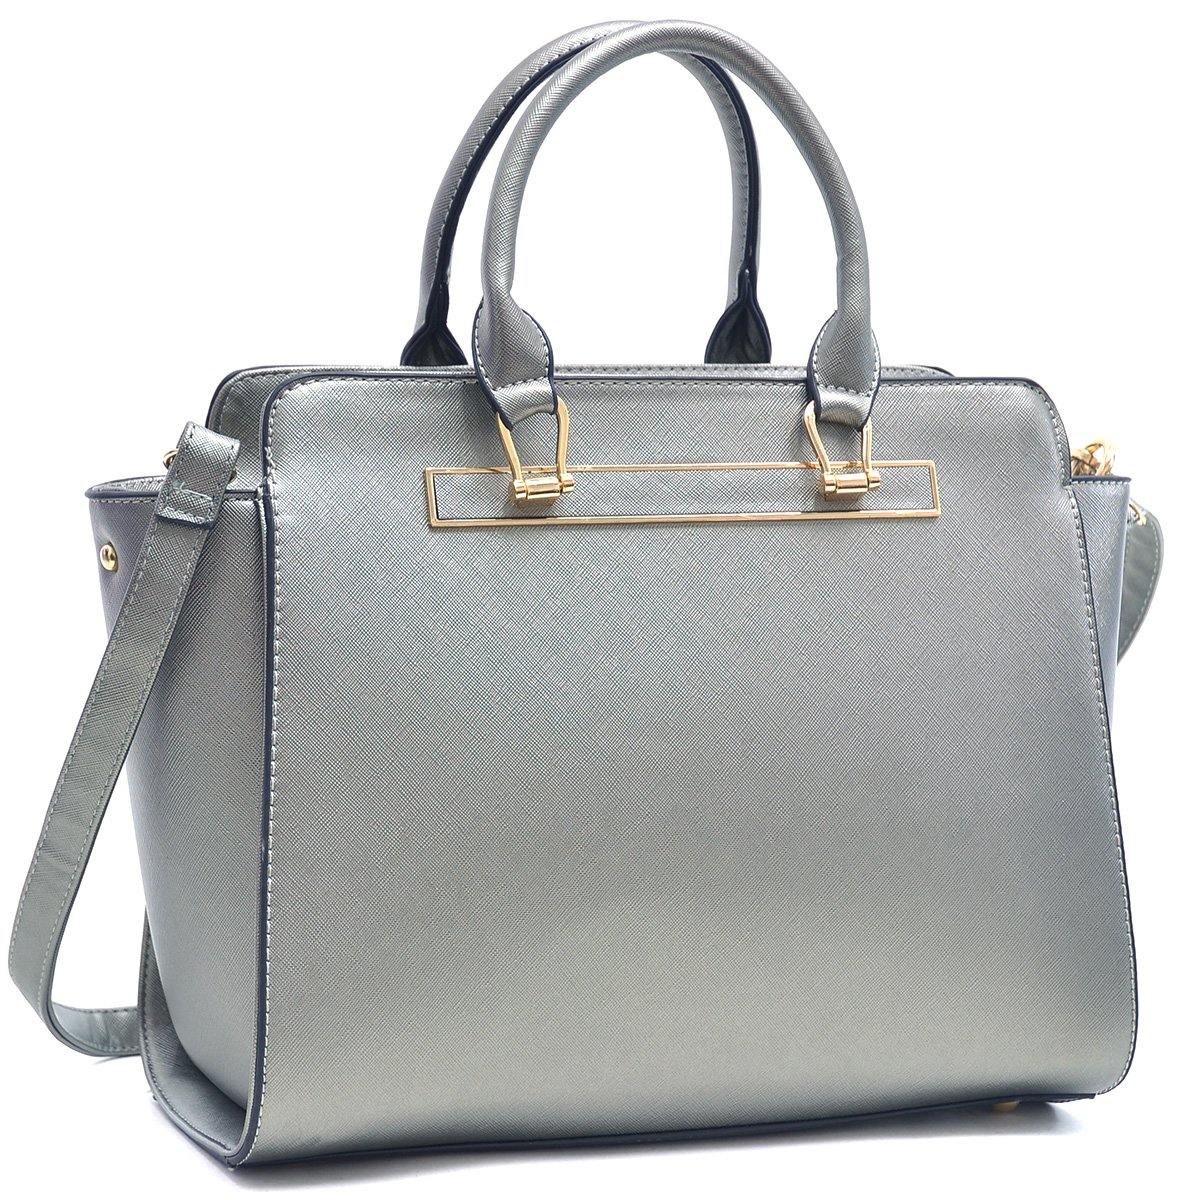 Dasein Faux Saffiano Leather Winged Satchel with Shoulder Strap